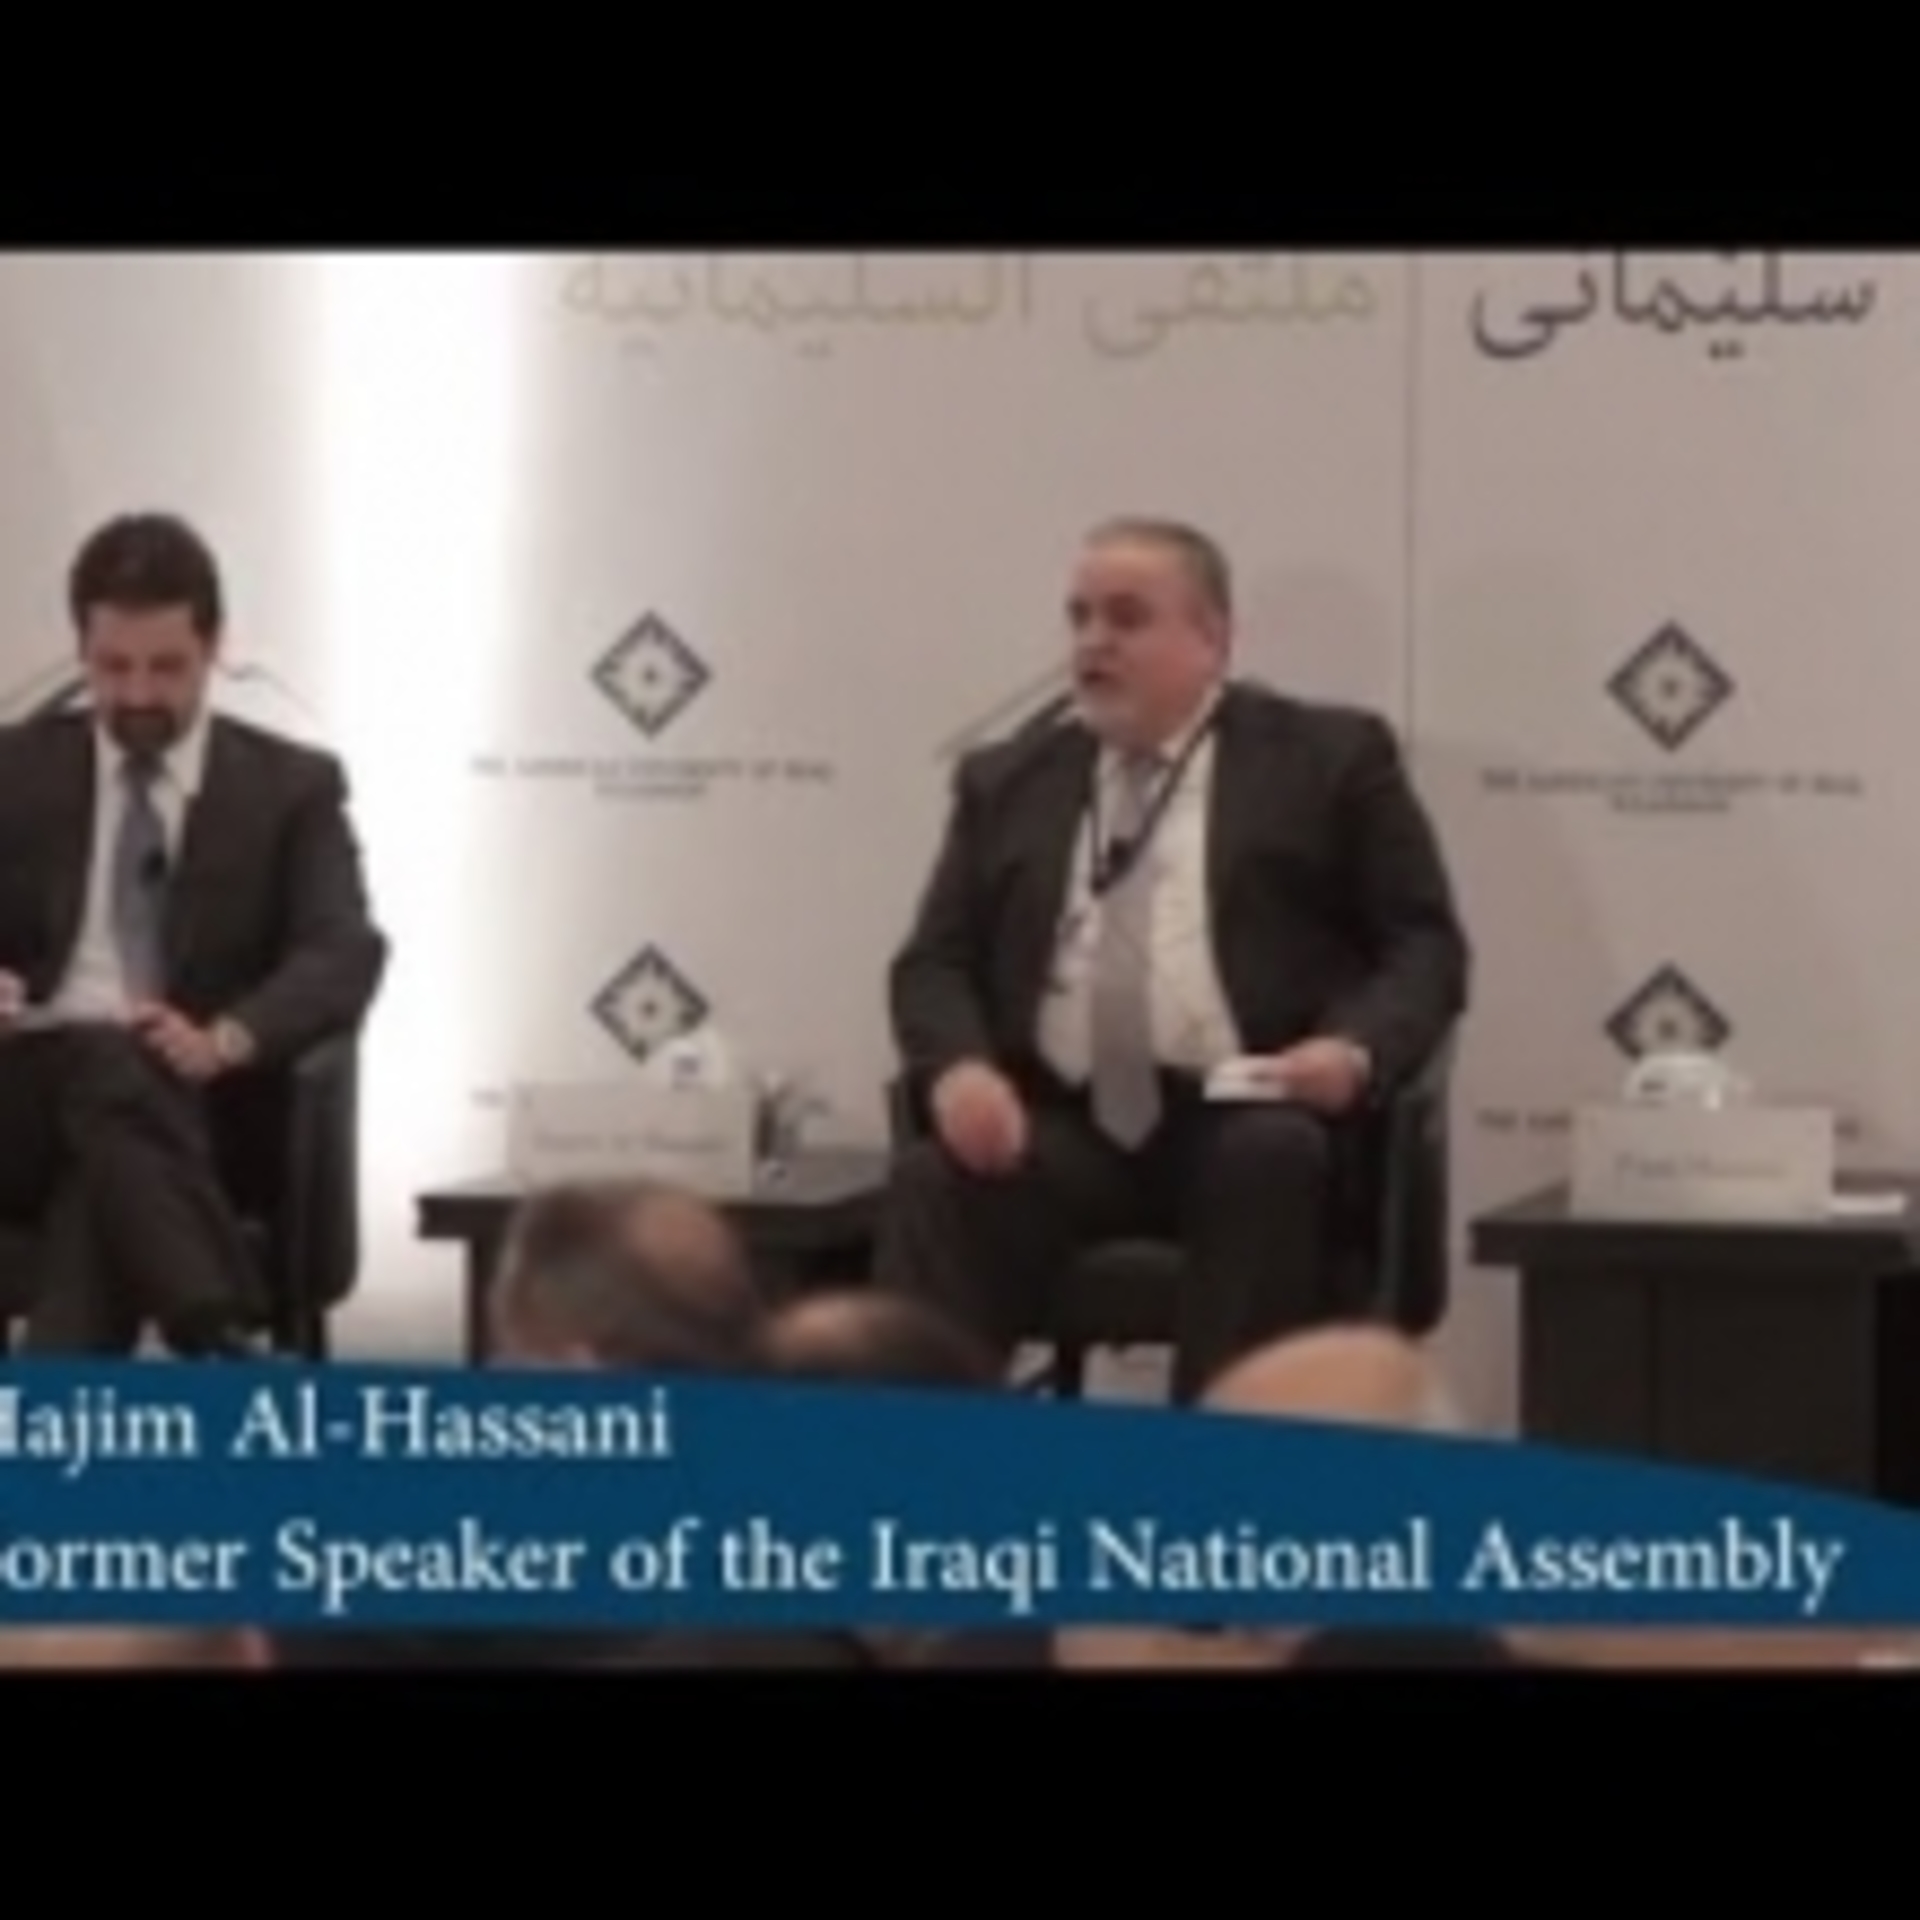 Iraq: An Insider's Perspective, Sulaimani Forum 2014